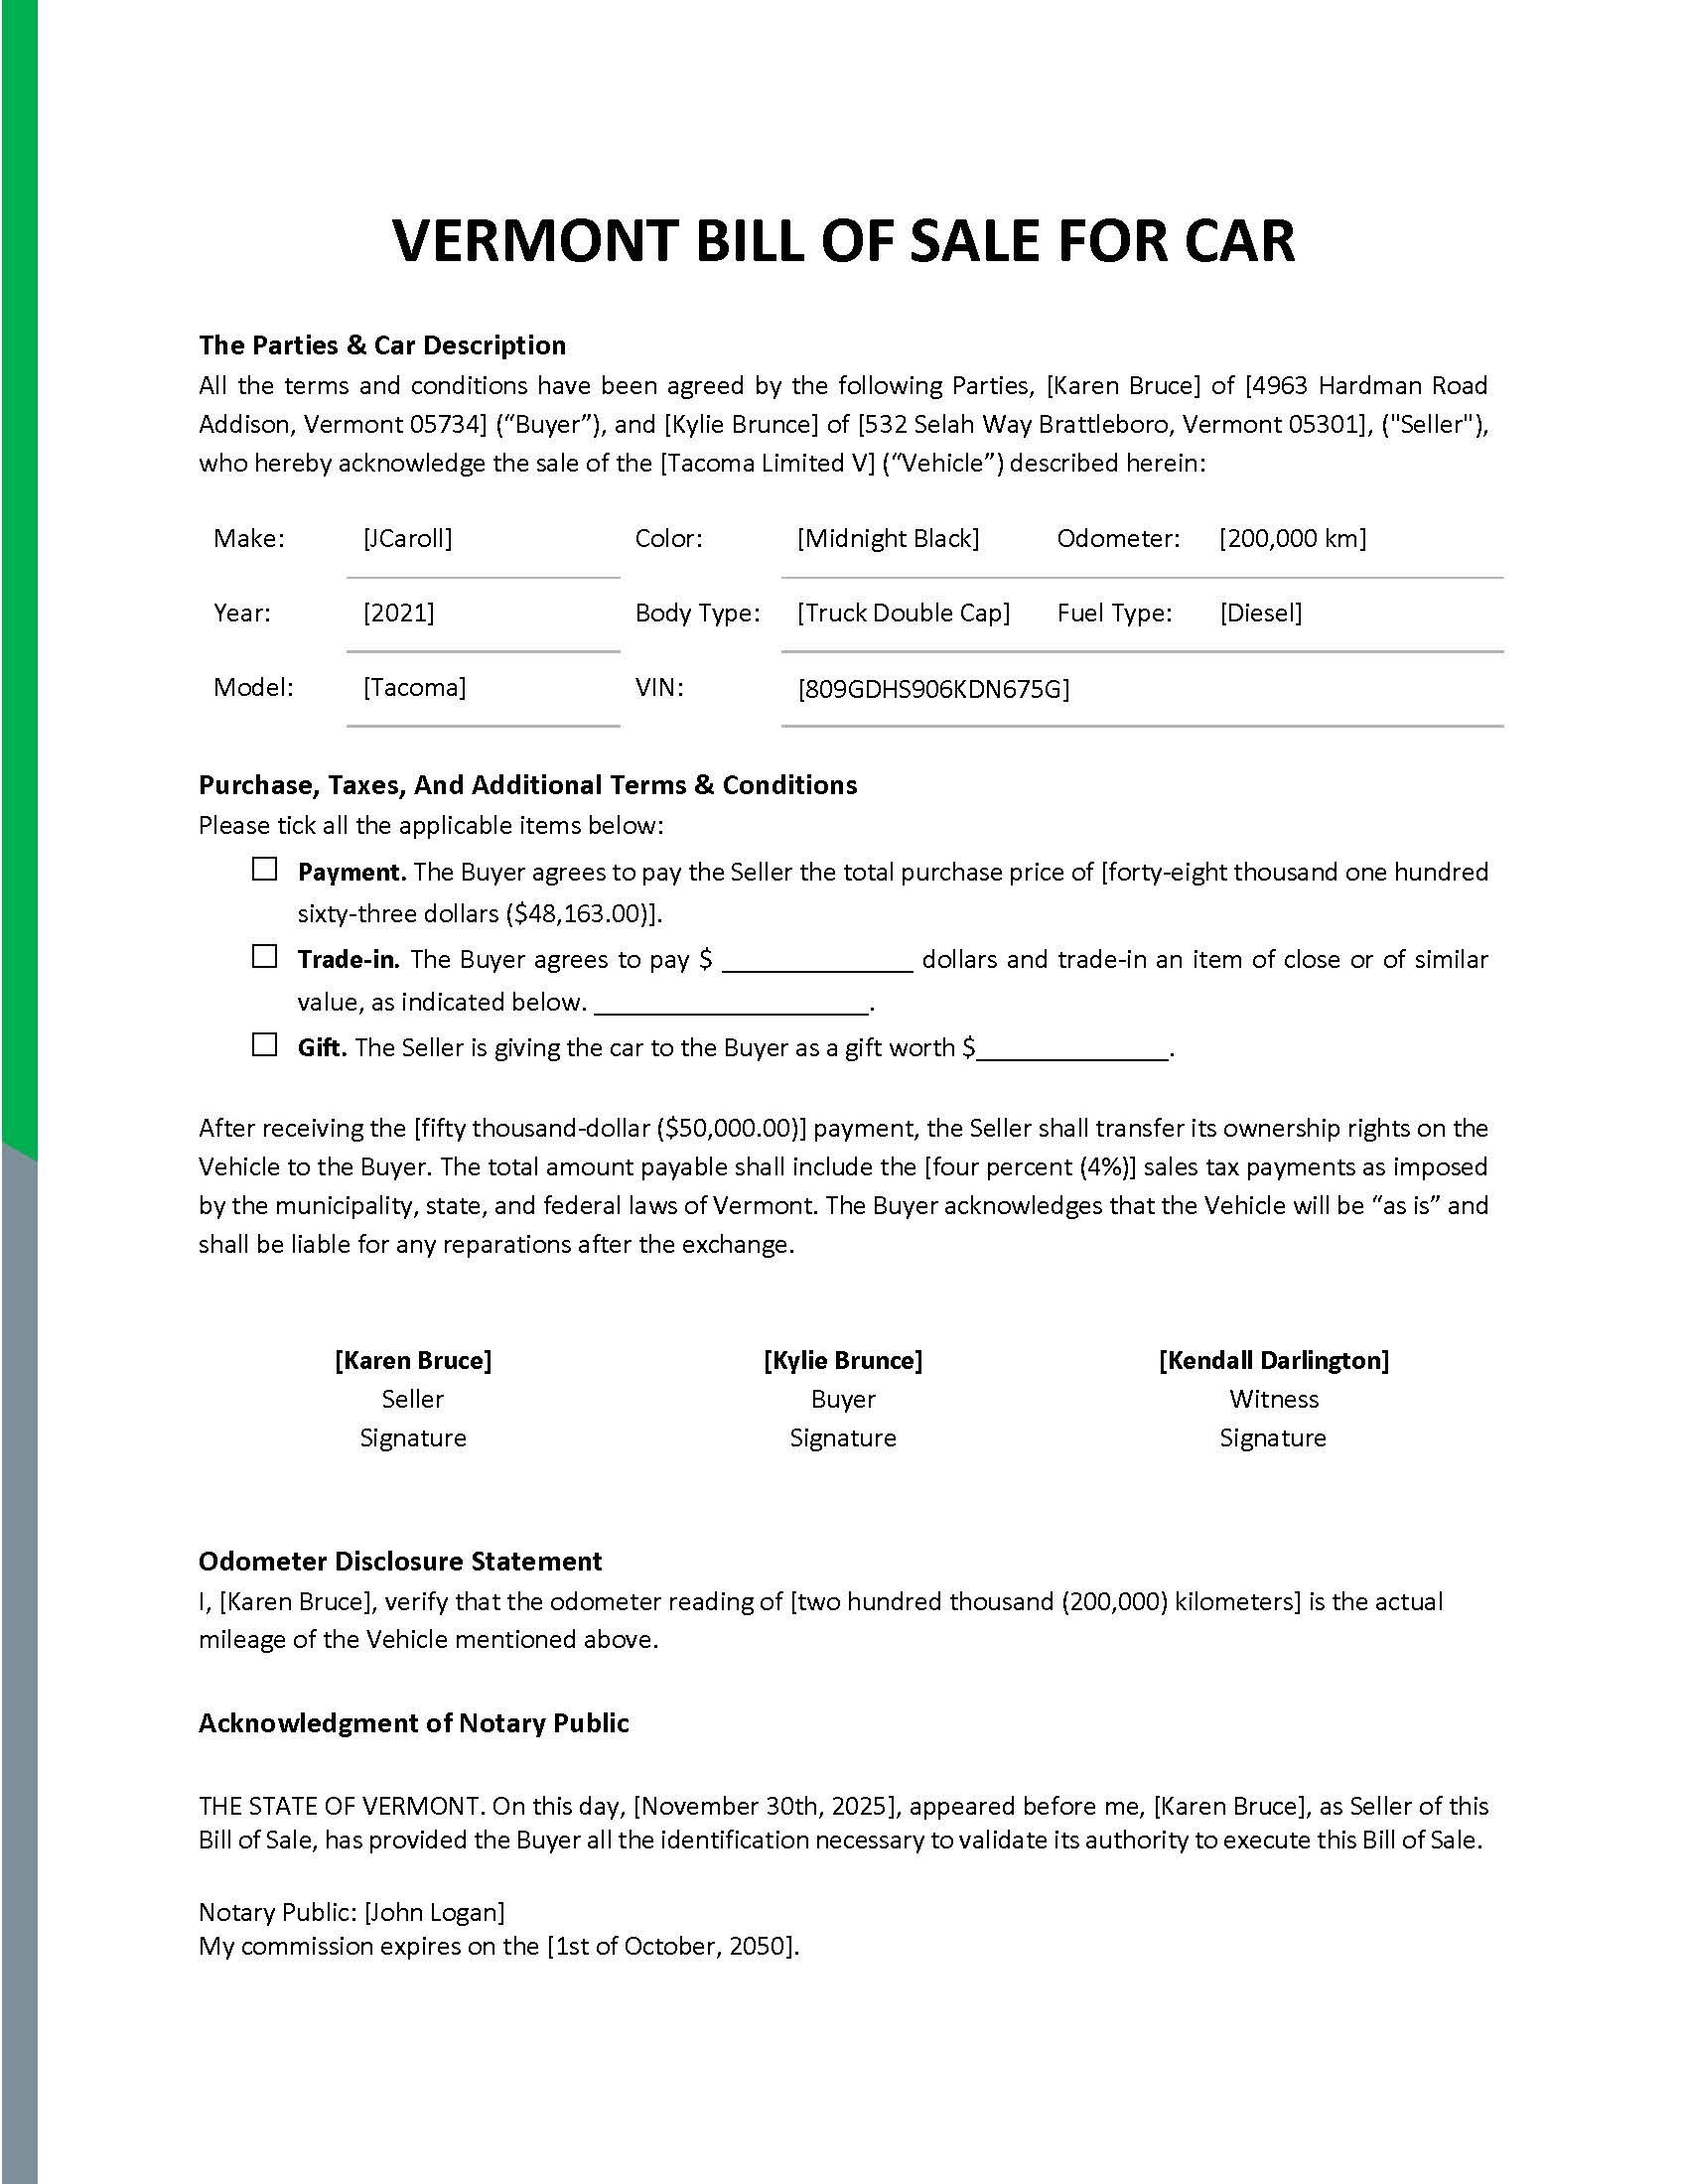 Vermont Bill of Sale For Car Template